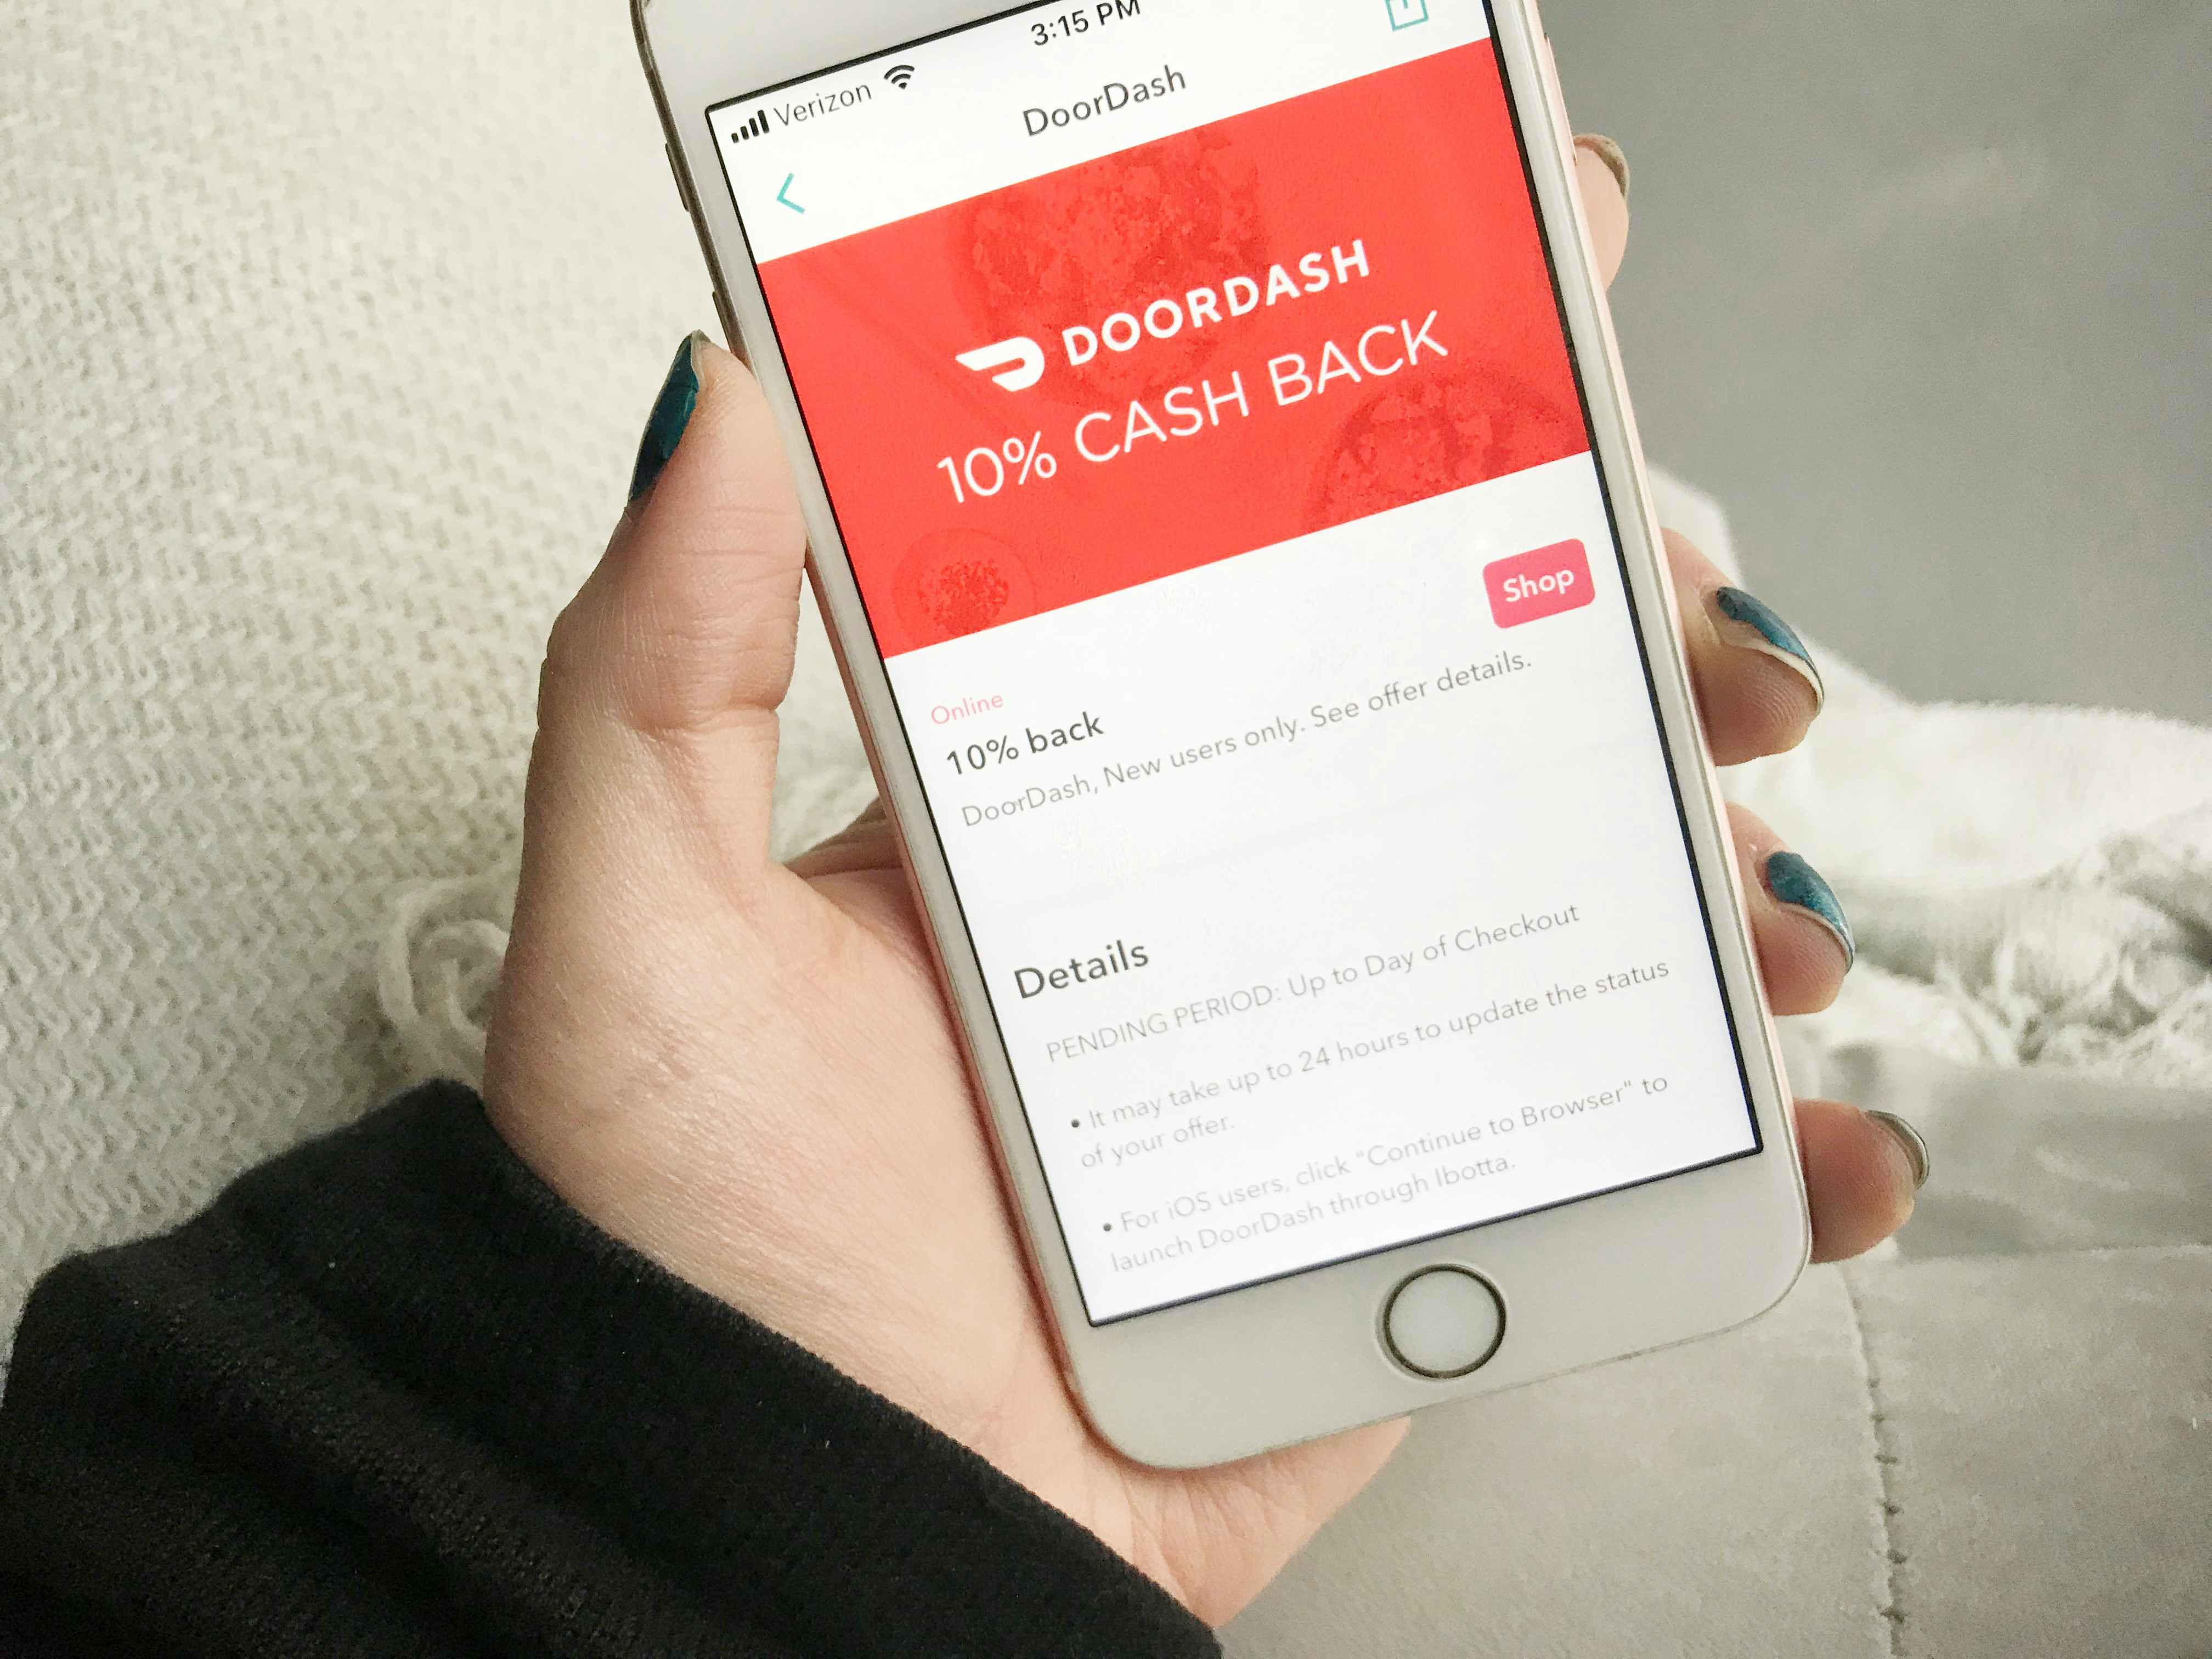 Get FREE delivery through DoorDash when you order the Impossible Burger.